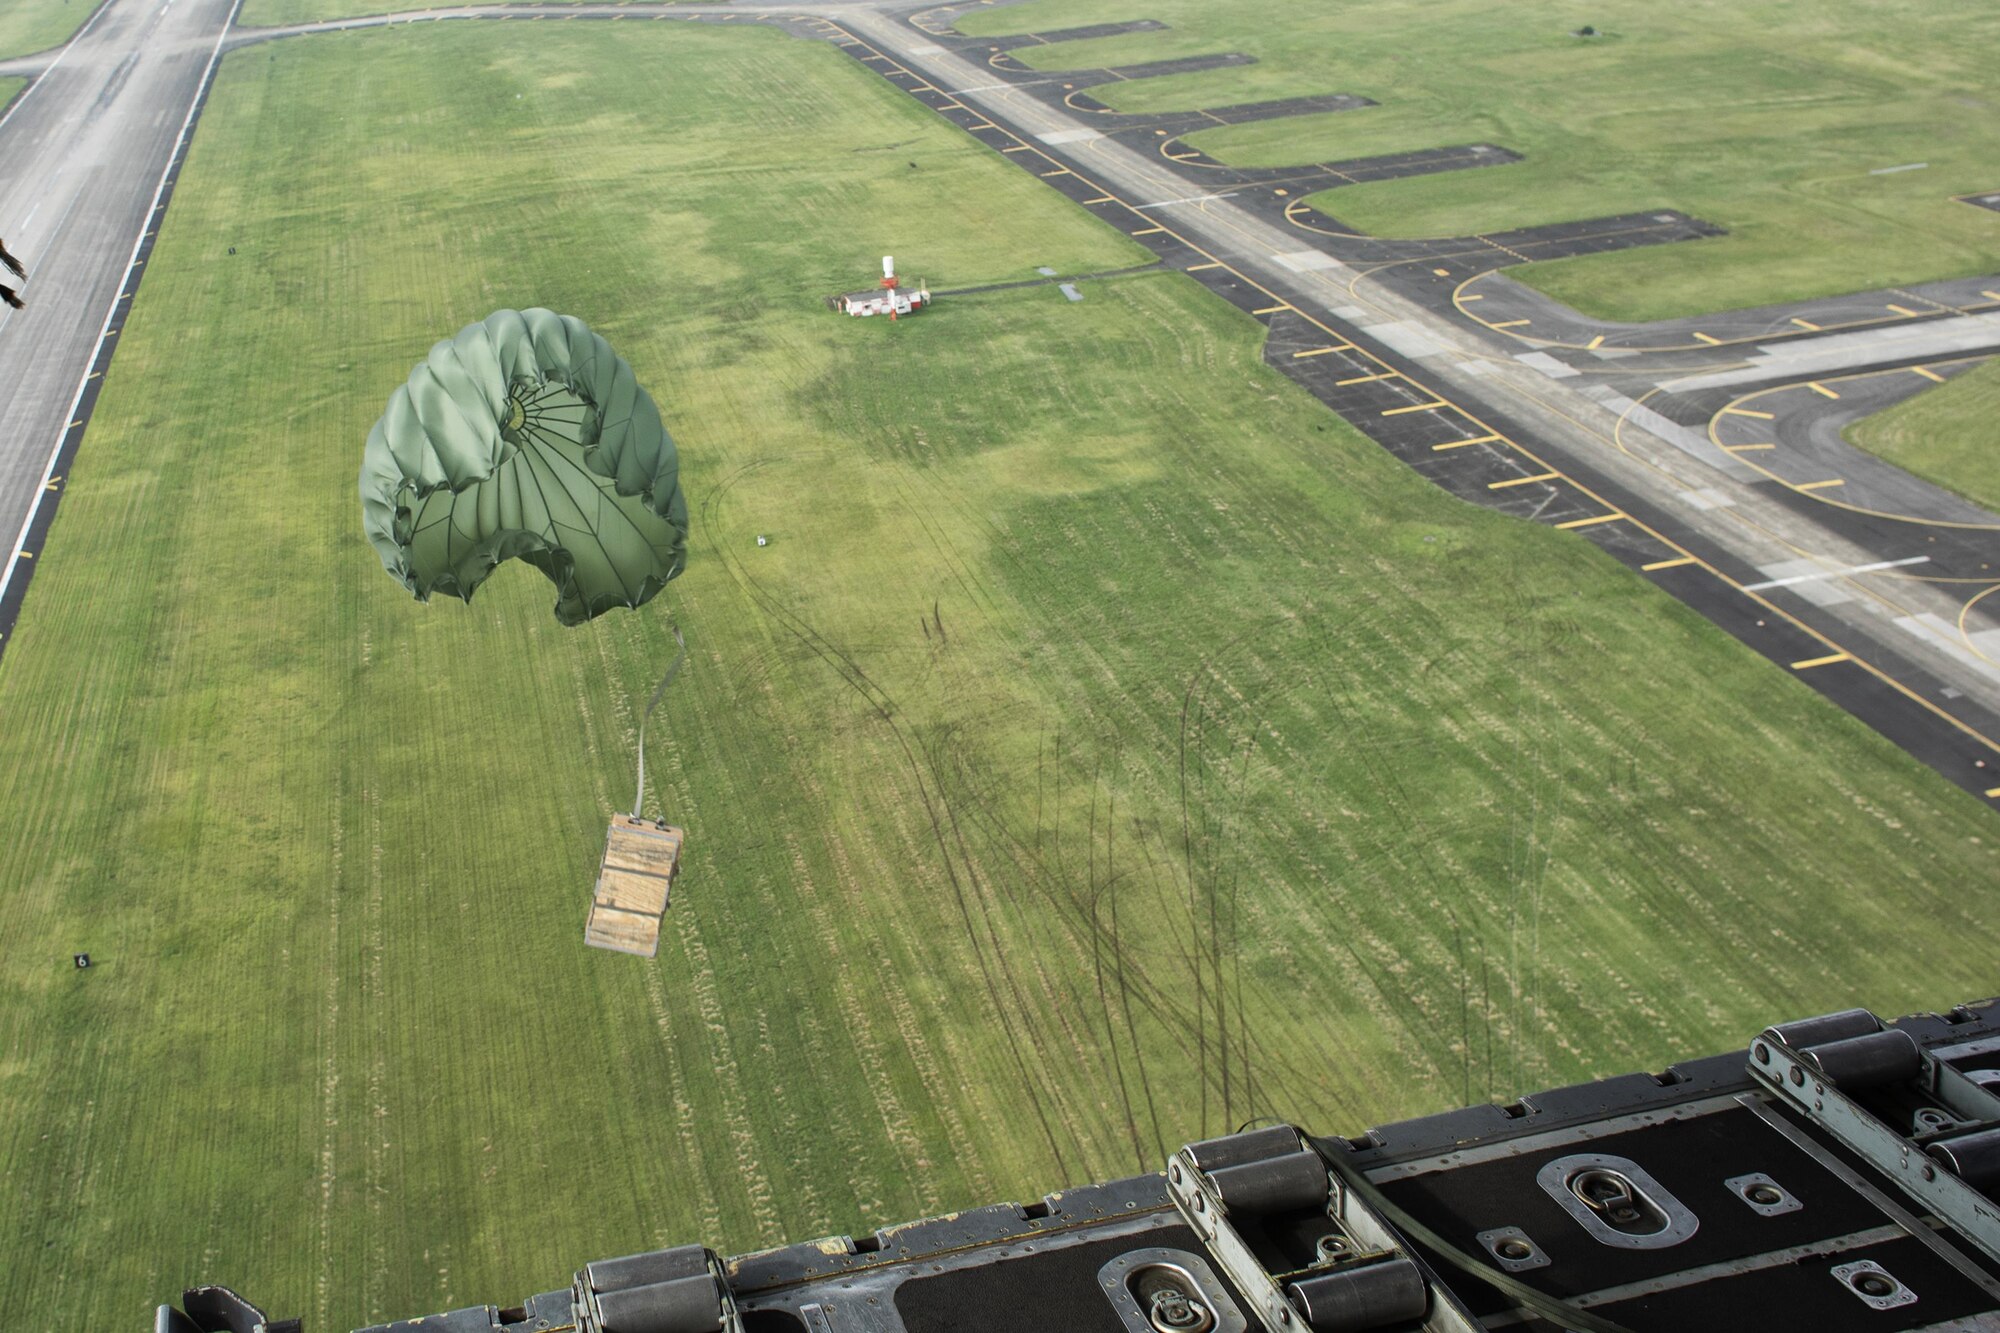 A low-cost, low-altitude bundle drops to a drop zone at Yokota Air Base, Japan, Sept. 17, 2016, during the Japanese-American Friendship Festival. The 36 AS demonstrated their airdrop capabilities to festivalgoers. Yokota welcomed over 135,000 visitors to the festival. (U.S. Air Force photo by Yasuo Osakabe/Released)